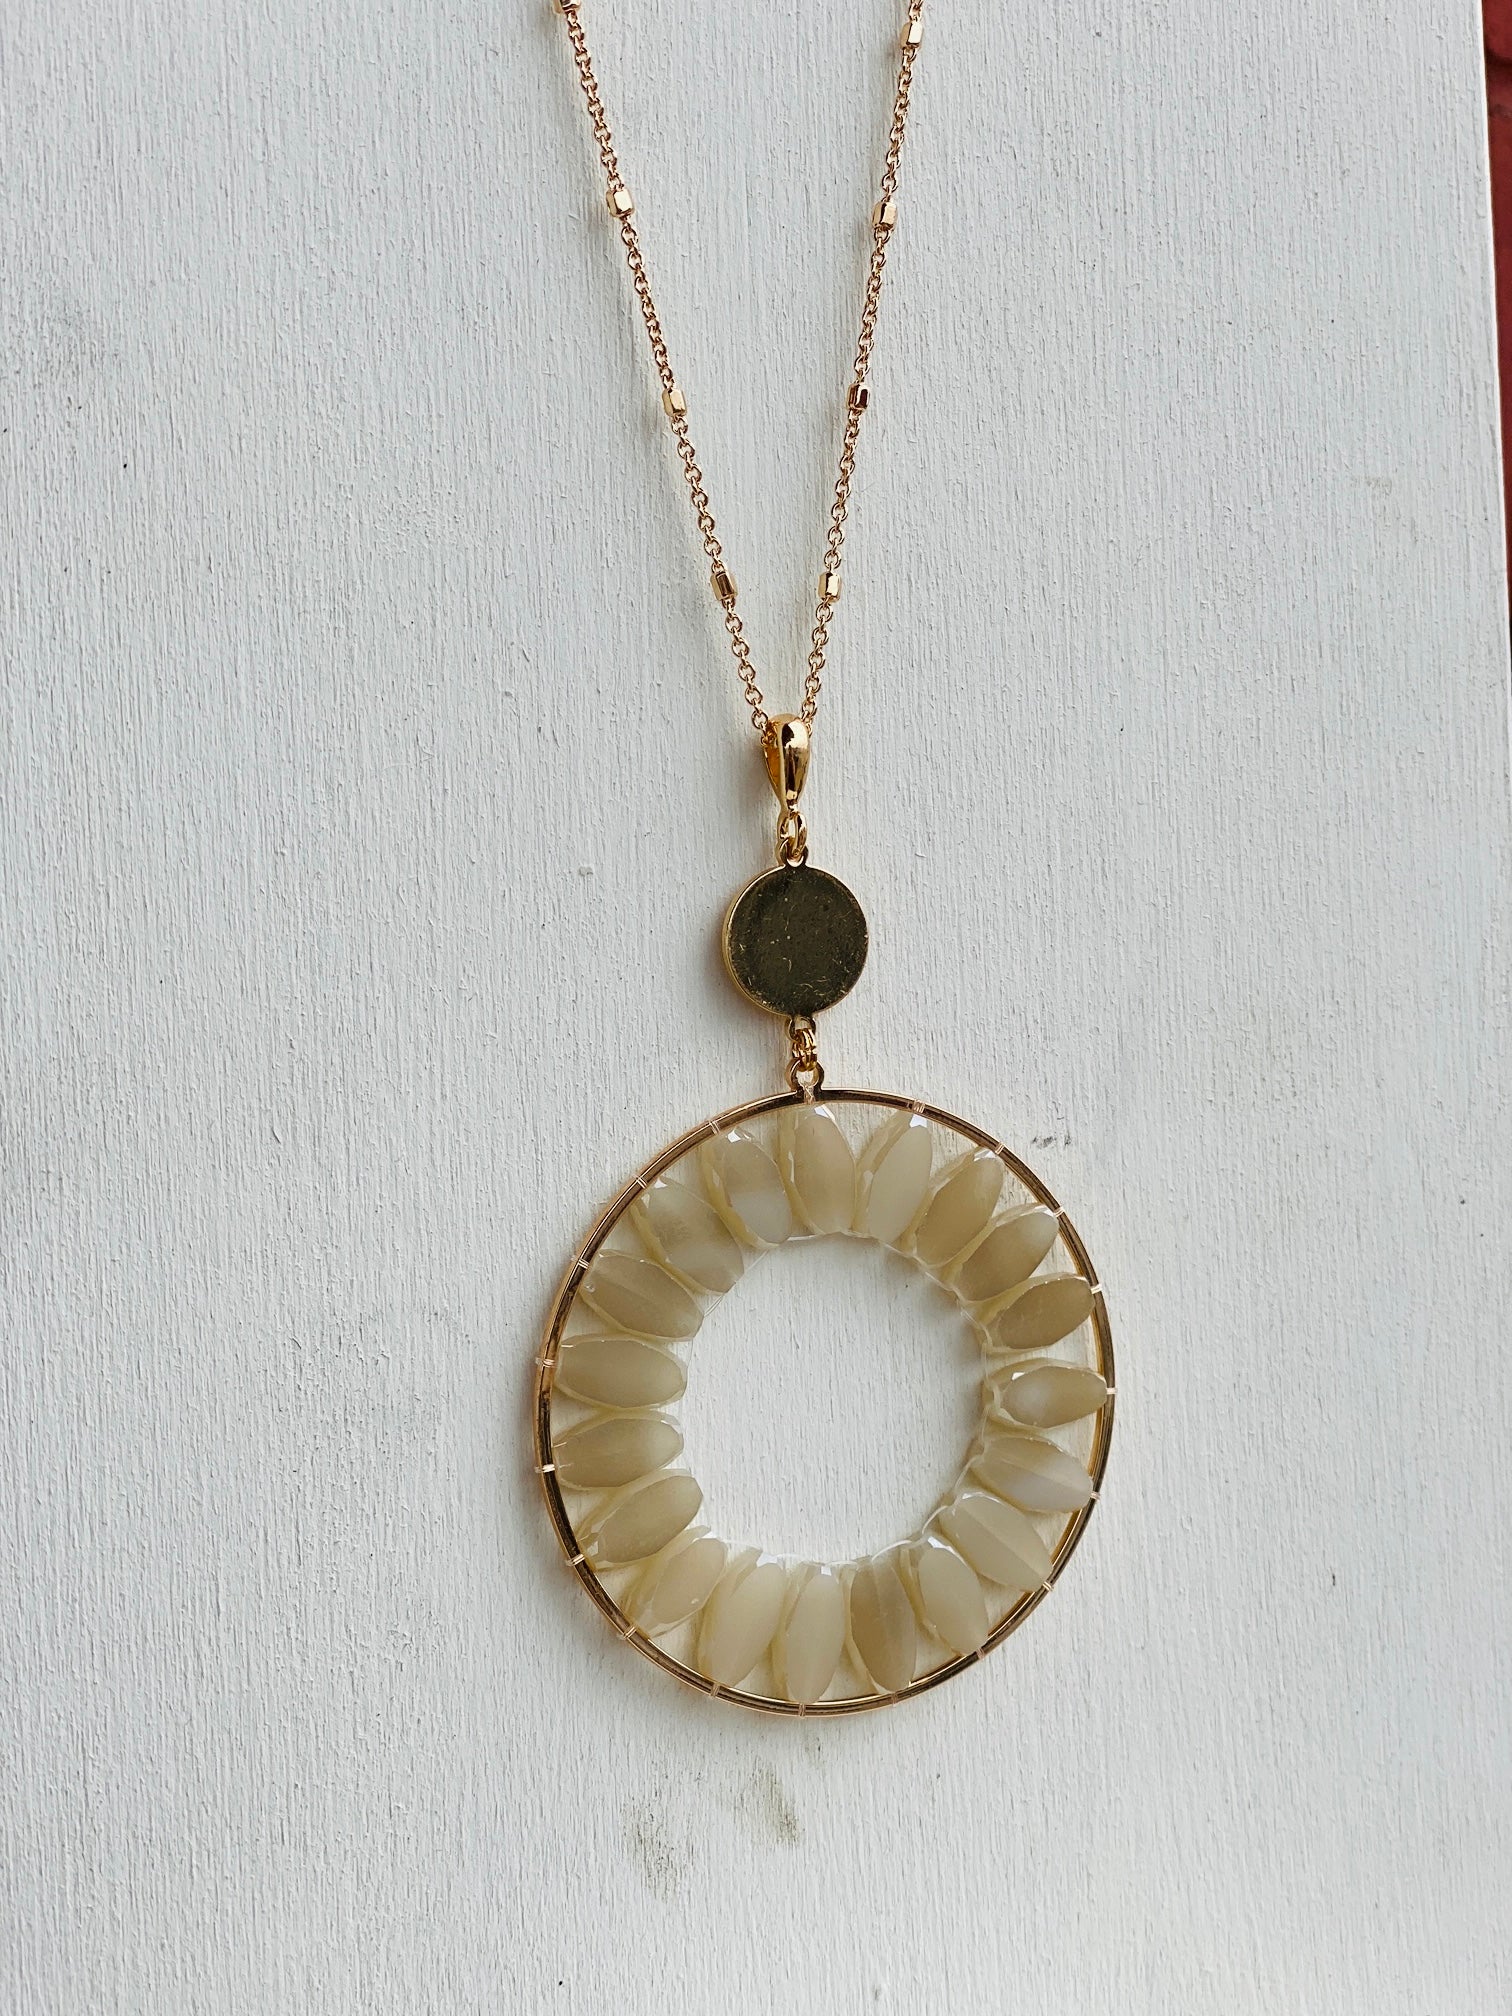 On The Lookout Cream & Gold Necklace